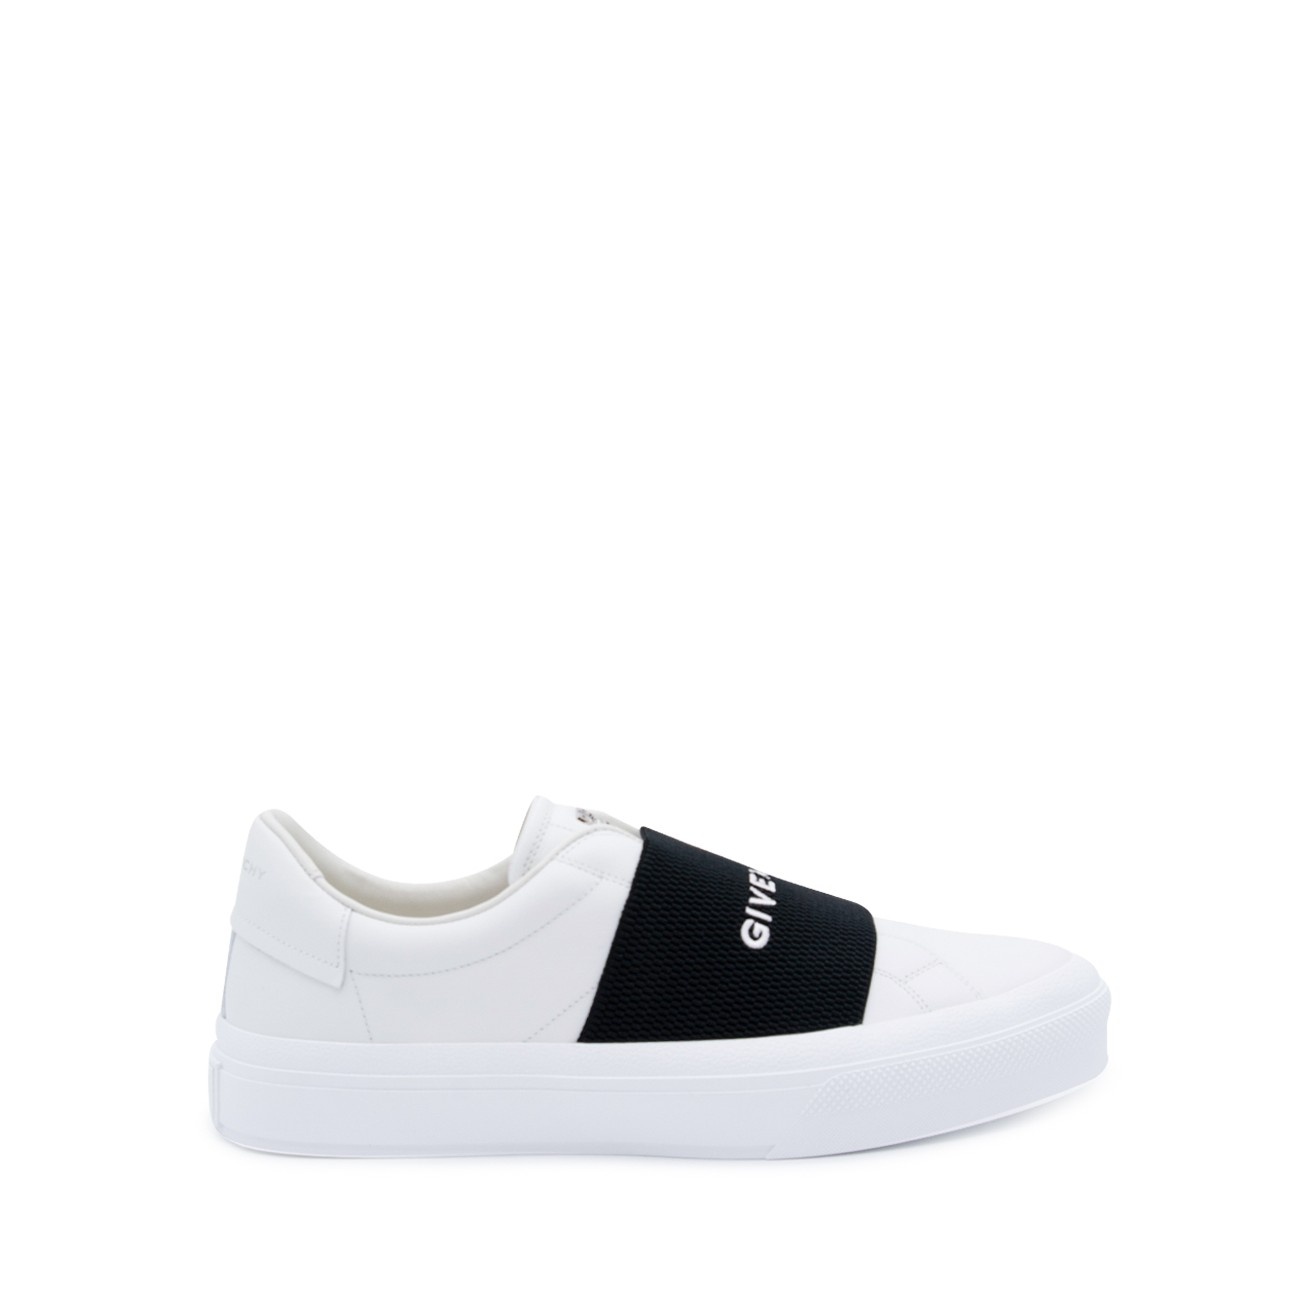 white and black leather city sneakers - 1